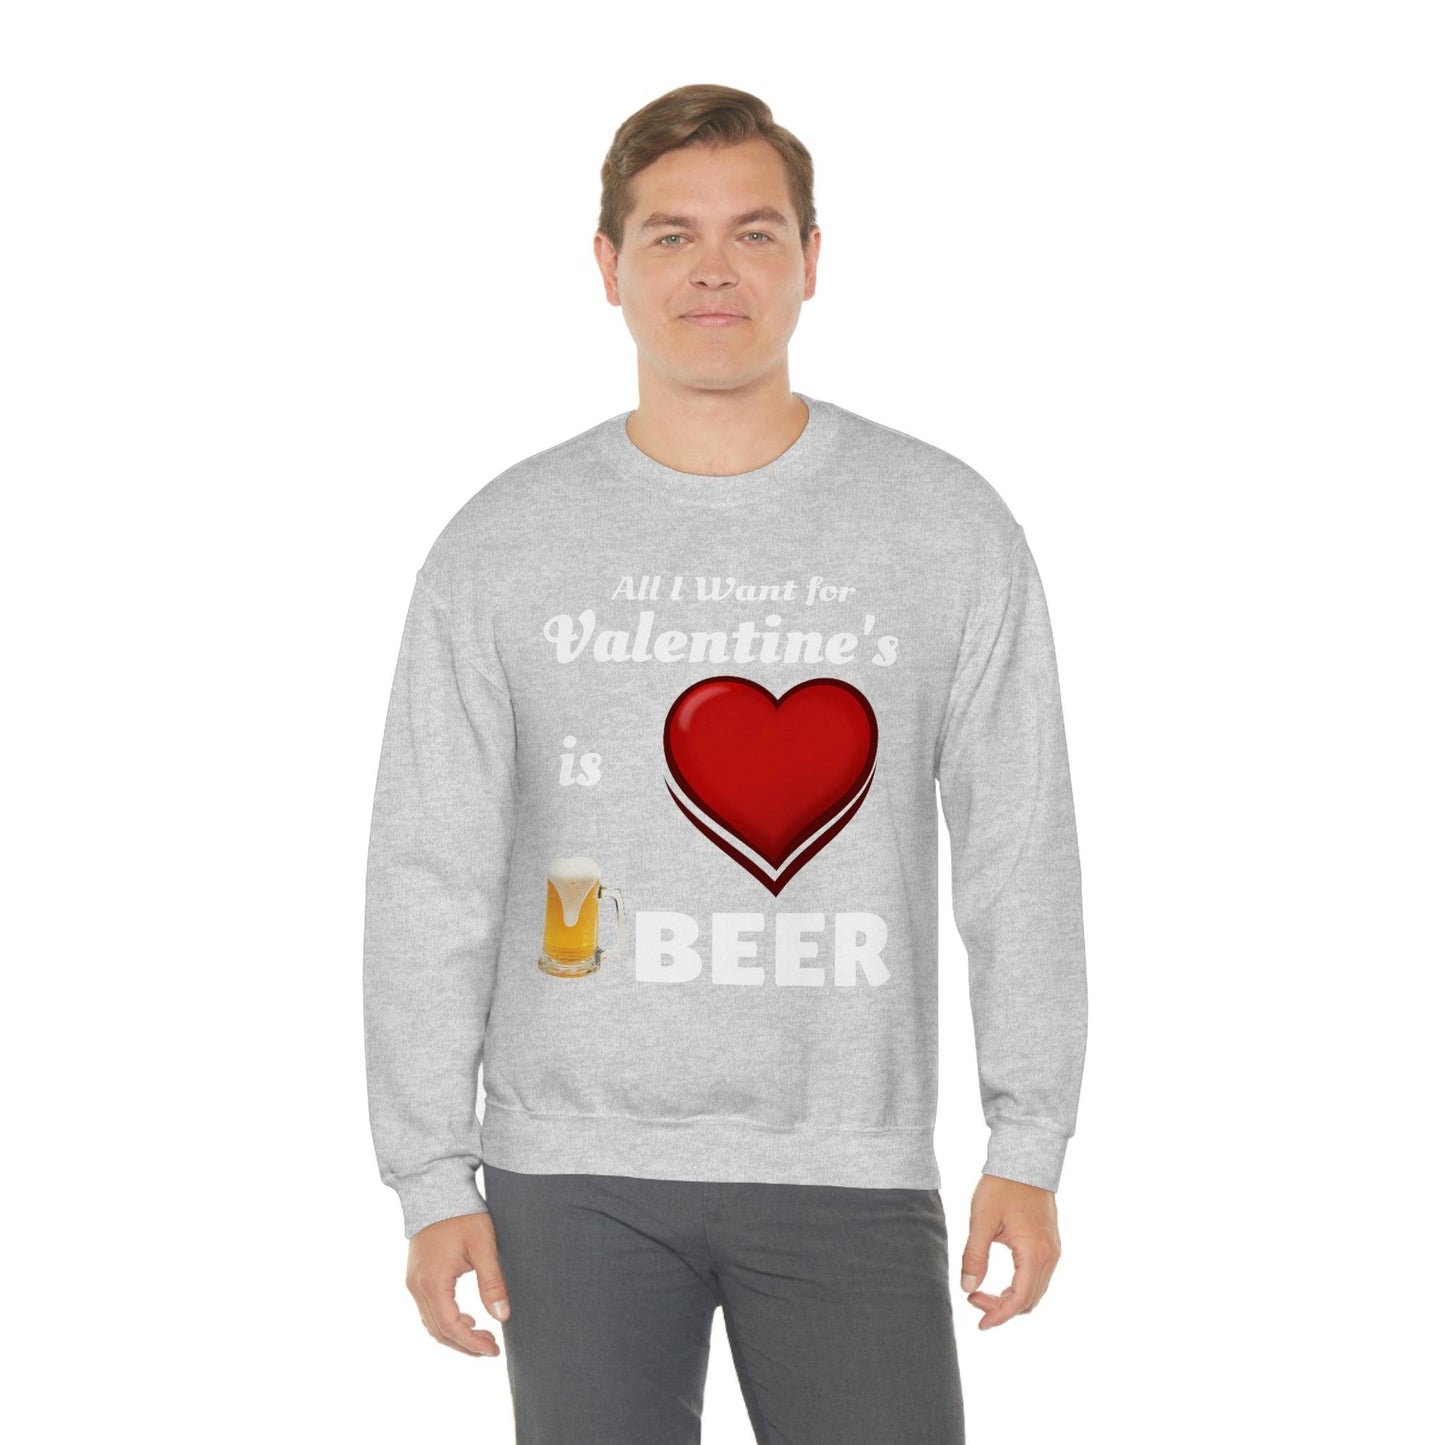 All I want for Valentine's is Beer Sweatshirt